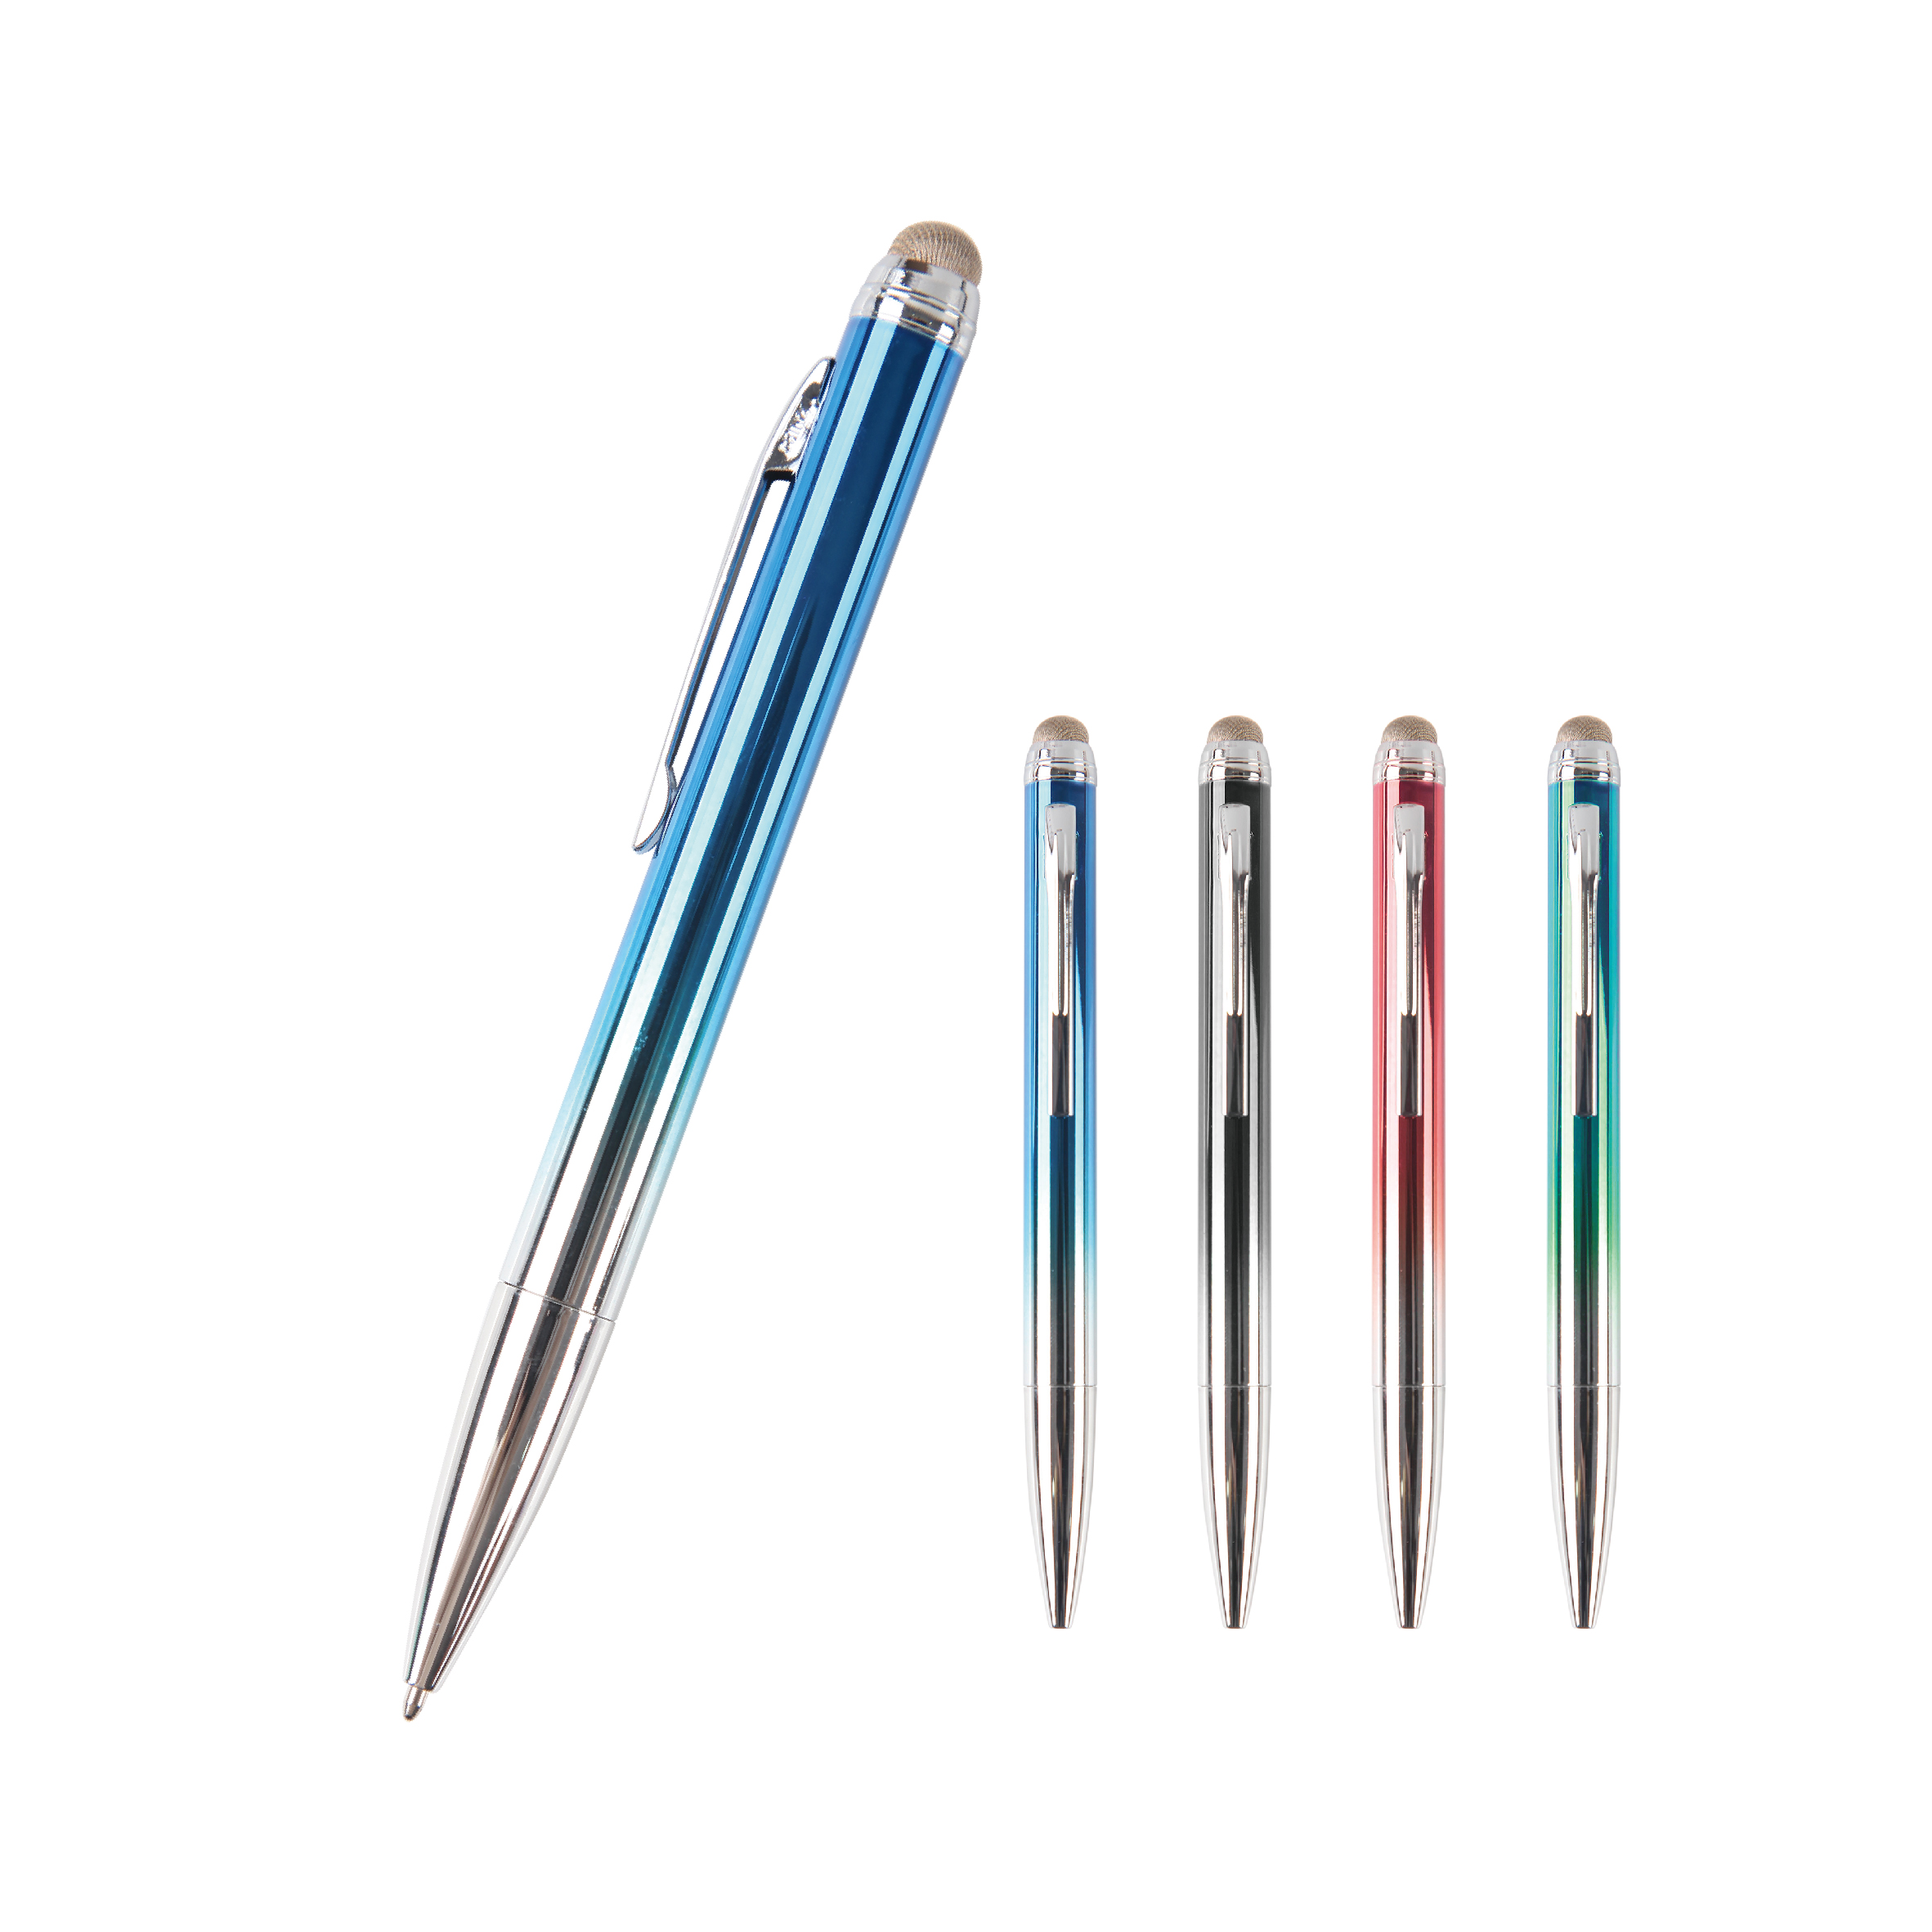 1.0mm/0.7mm Twistable Metal Ball Pen Retractable With Stylus On Top